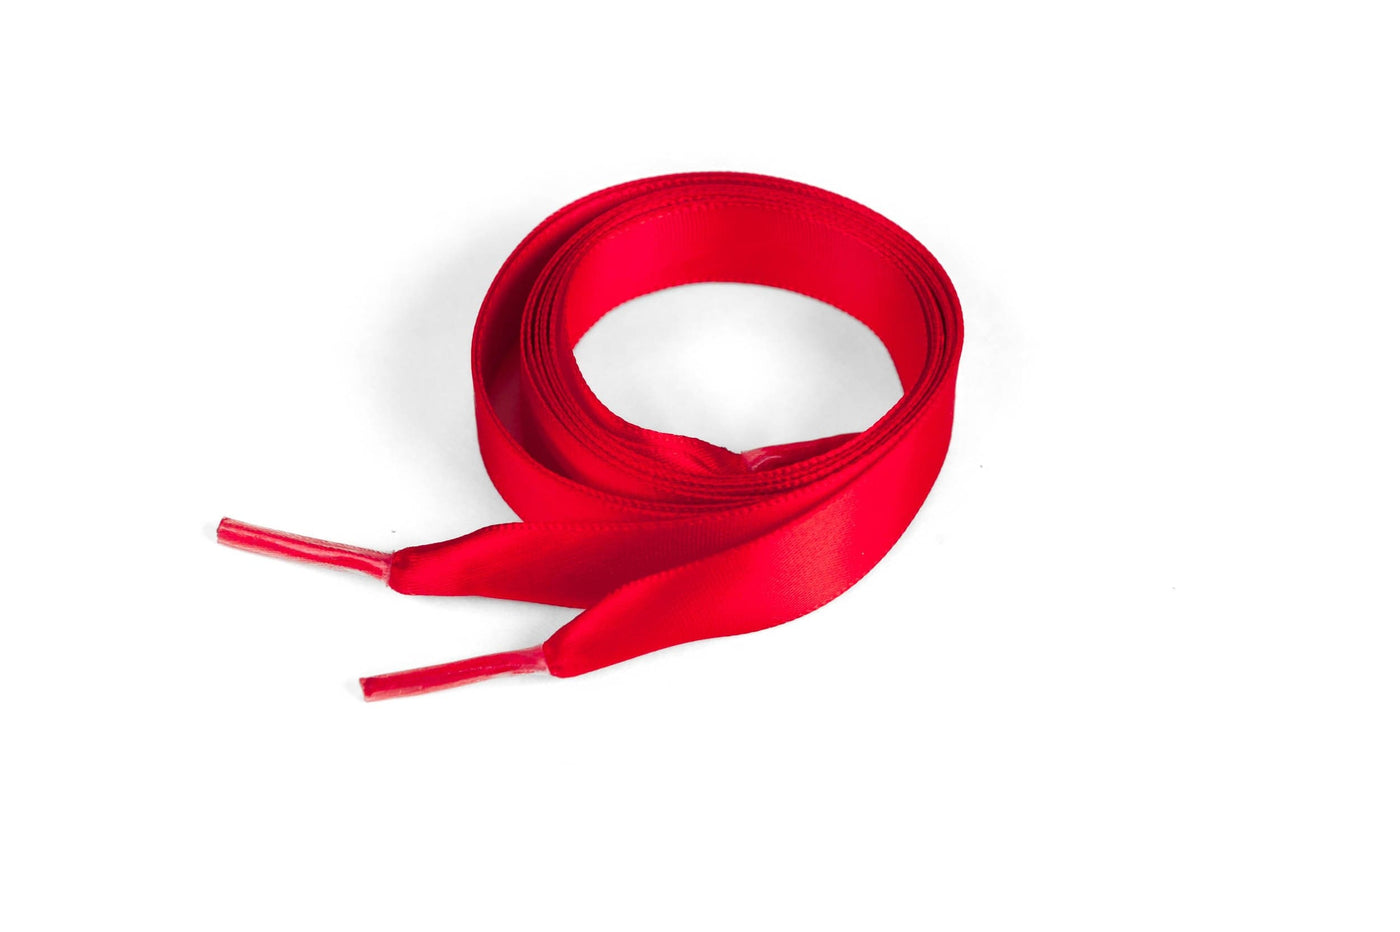 Satin Ribbon 5/8" Premium Quality Shoelaces - 48" Inch Length Red